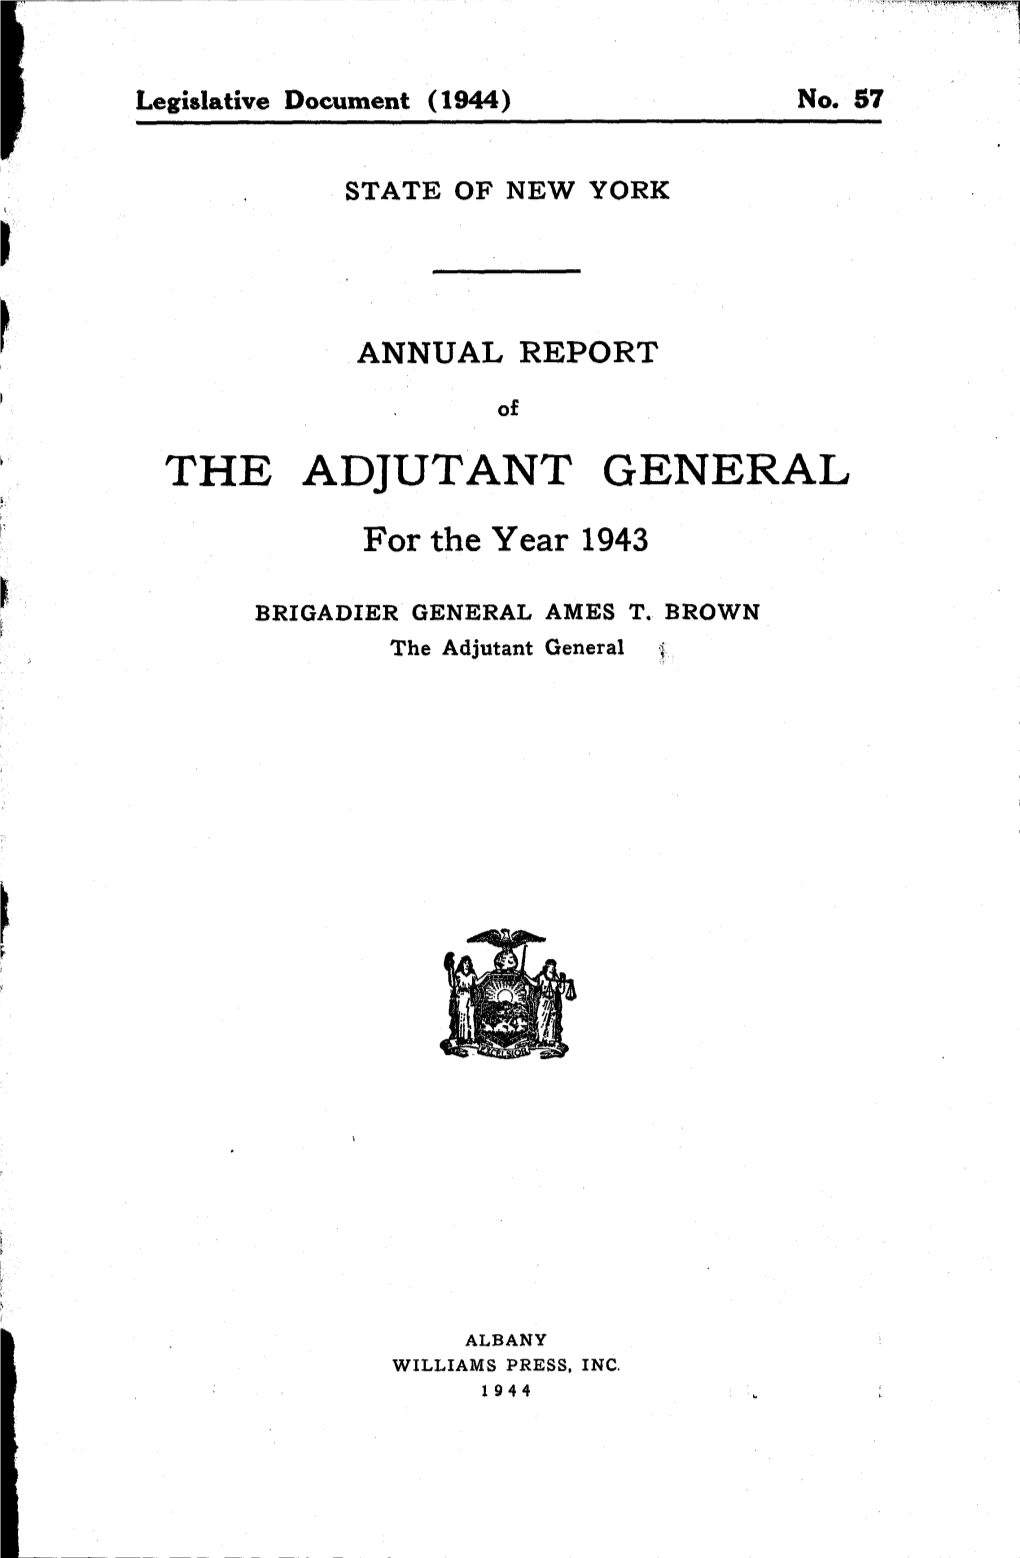 THE ADJUTANT GENERAL for the Year 1943